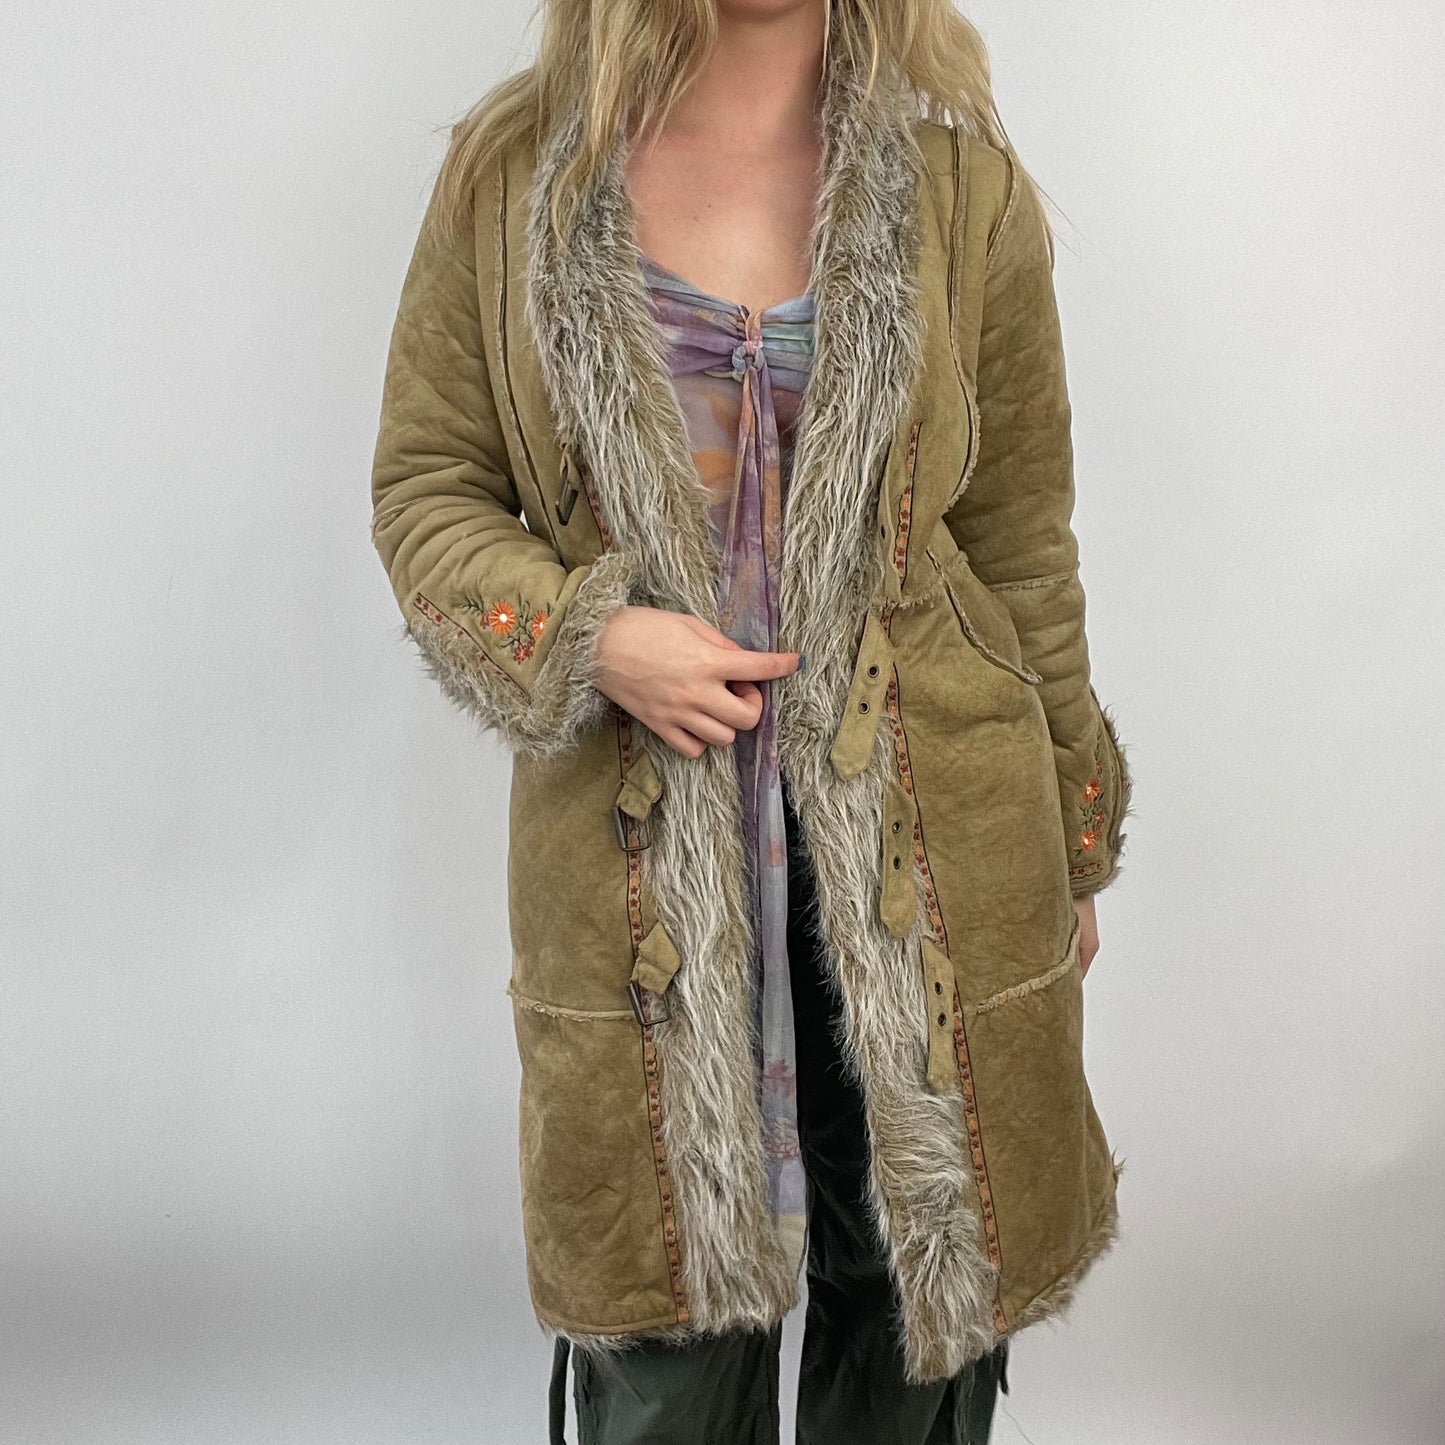 HIPPY CHIC DROP | large tan afghan coat with embroidered arms